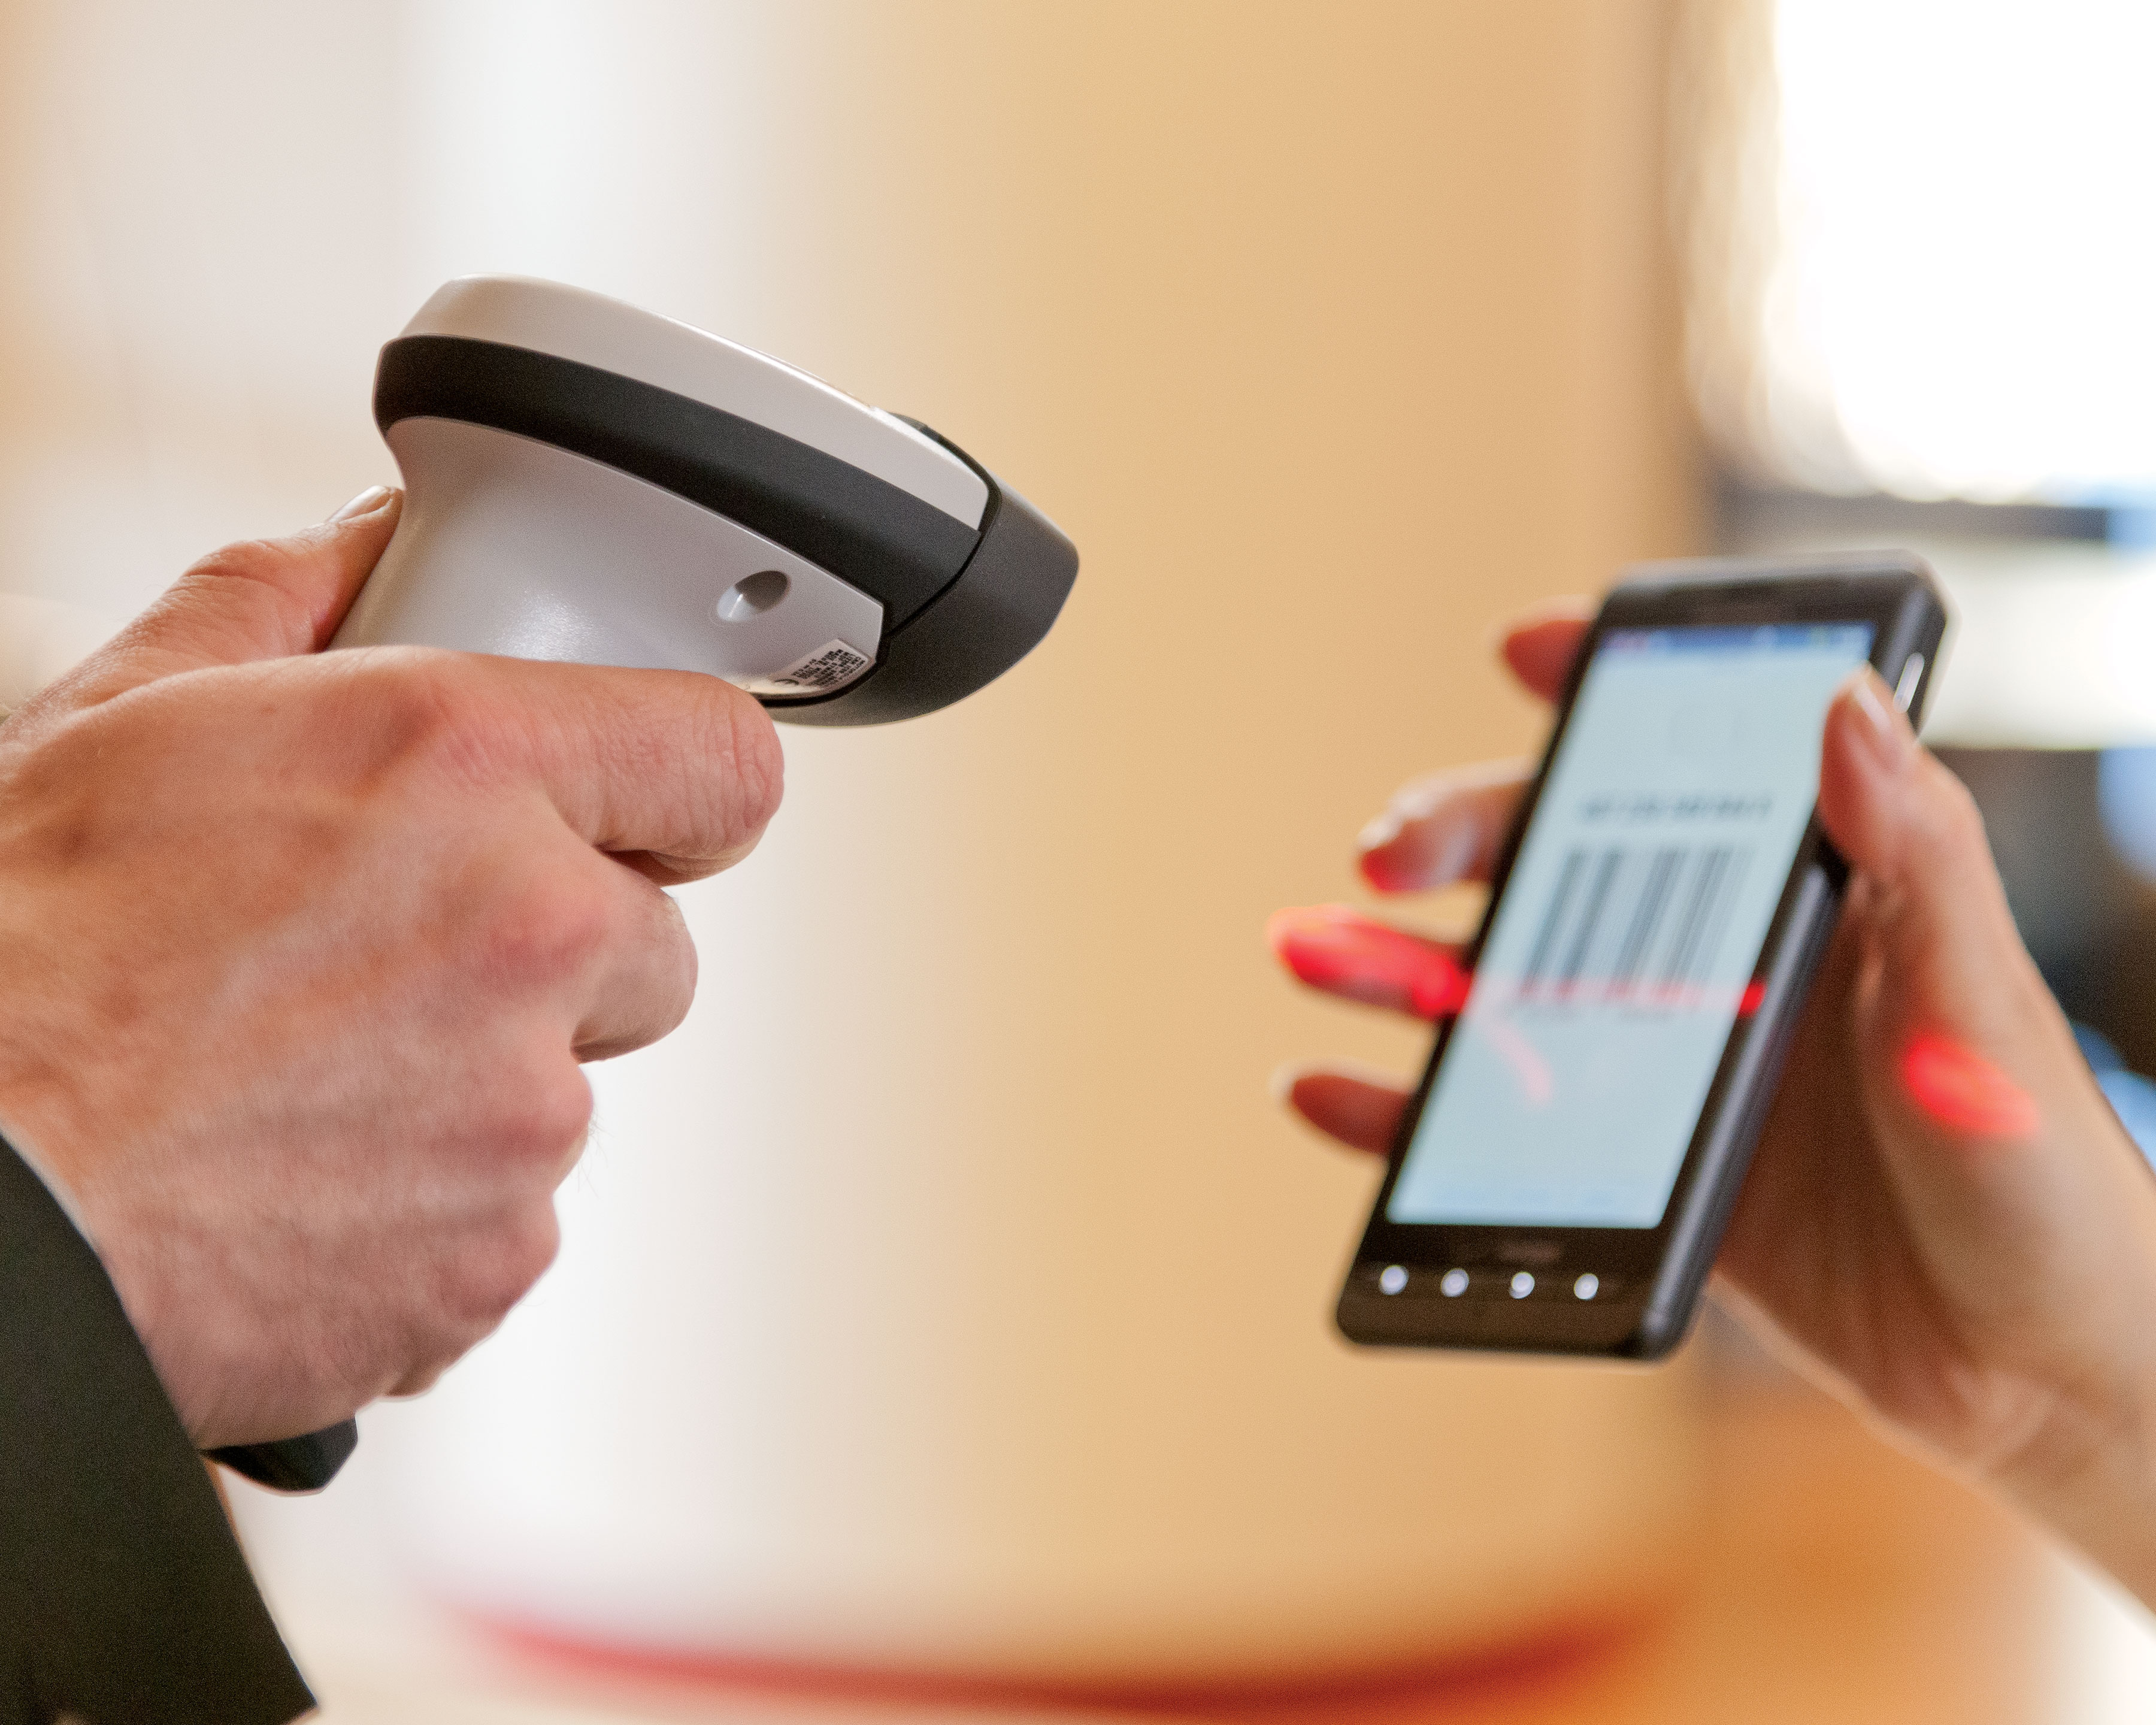 Zebra LI2208 barcode scanner for hospitality scans a barcode on a mobile phone screen